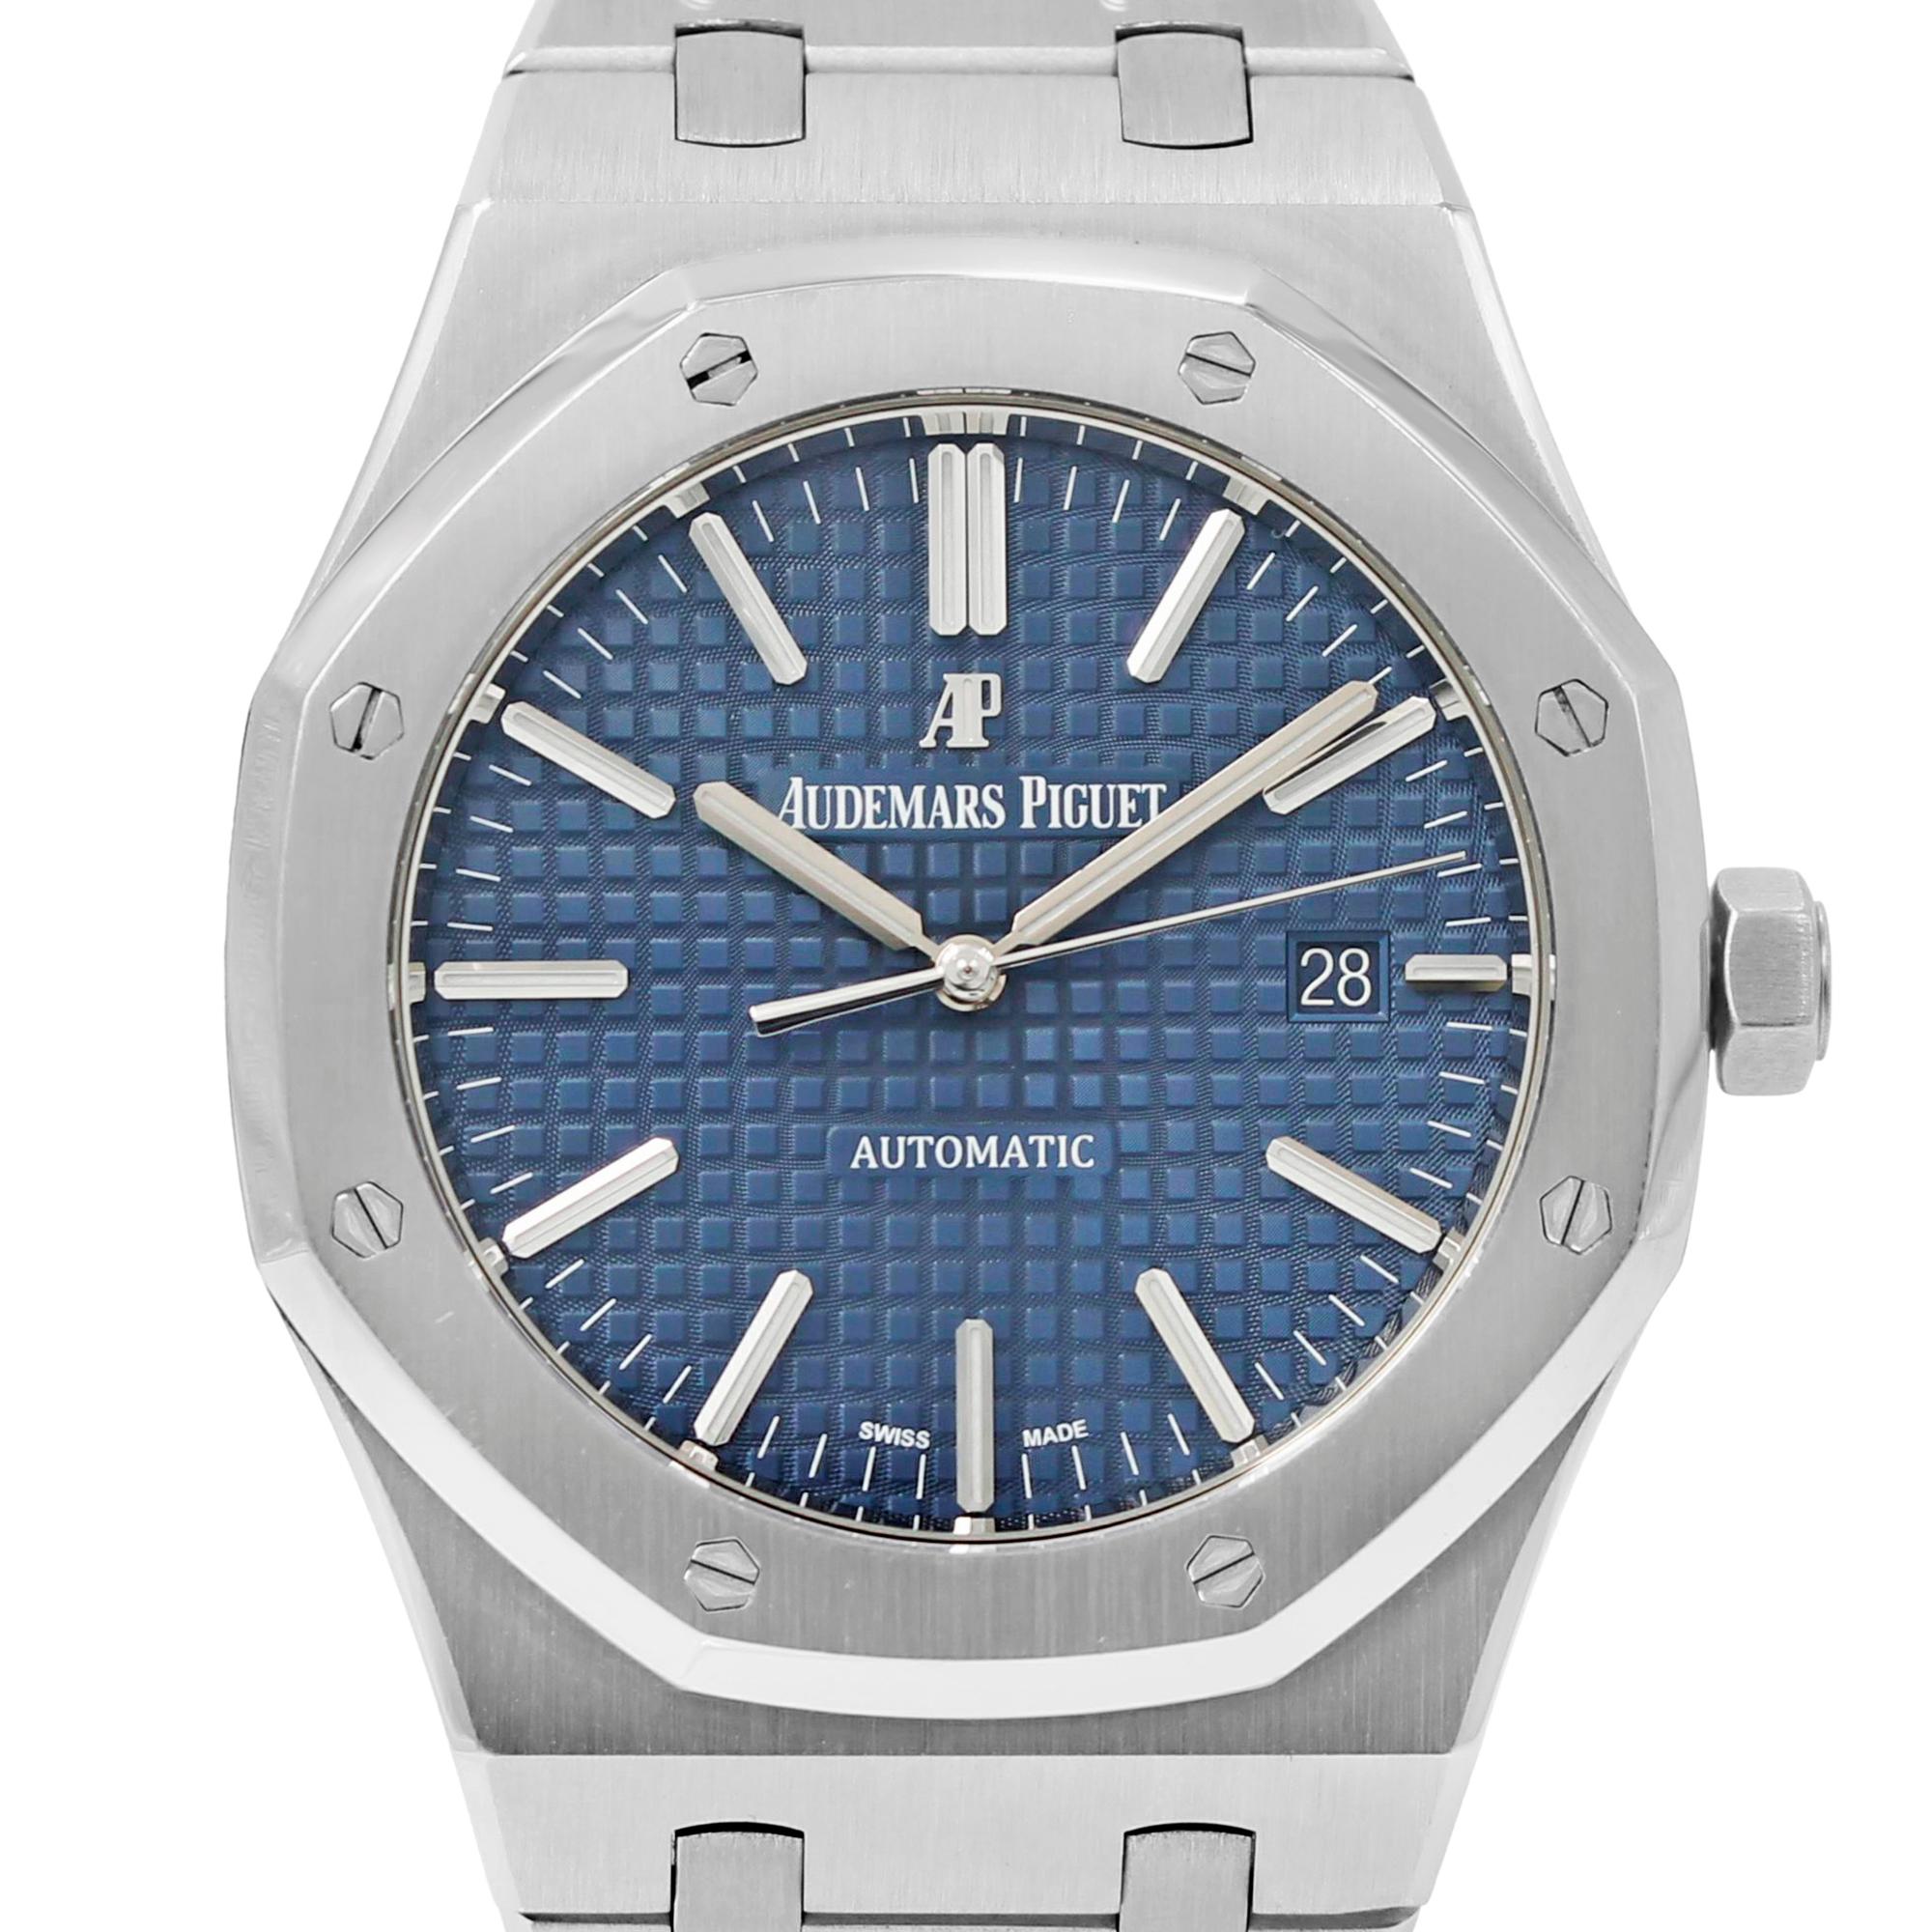 Pre Owned Audemars Piguet Royal Oak Steel Blue Dial Men's Watch 15400ST.OO.1220ST.03. This Beautiful Timepiece is Powered by Mechanical (Automatic) Movement and Features Round Stainless Steel Case with a Stainless Steel Bracelet, Fixed Octagon